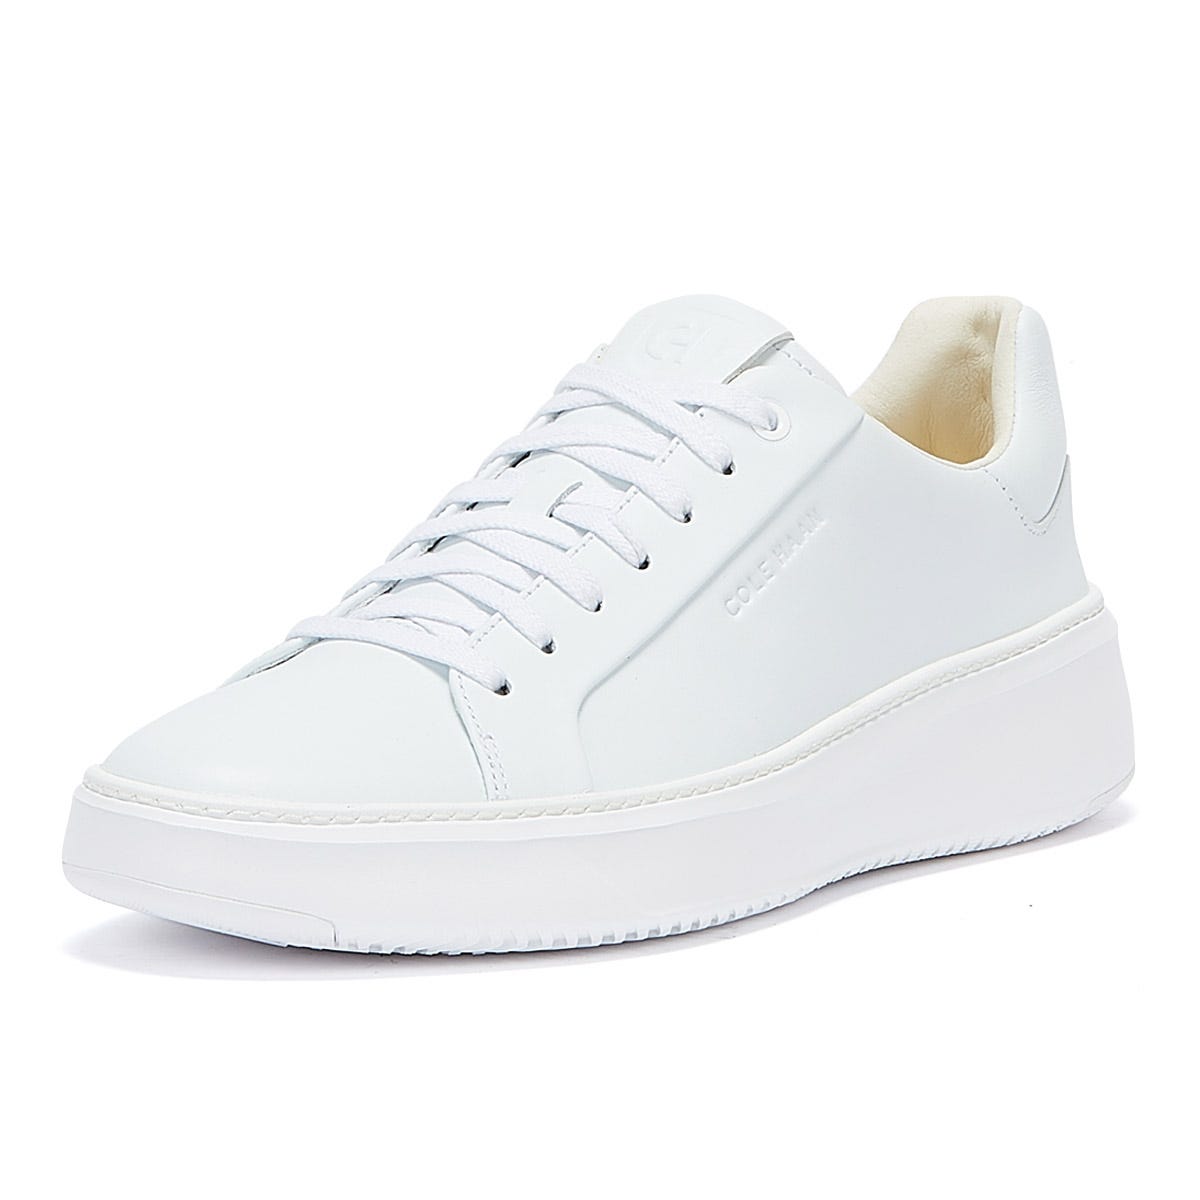 Cole Haan Grandpro Topspin Mens Optic White / Optic White Trainers